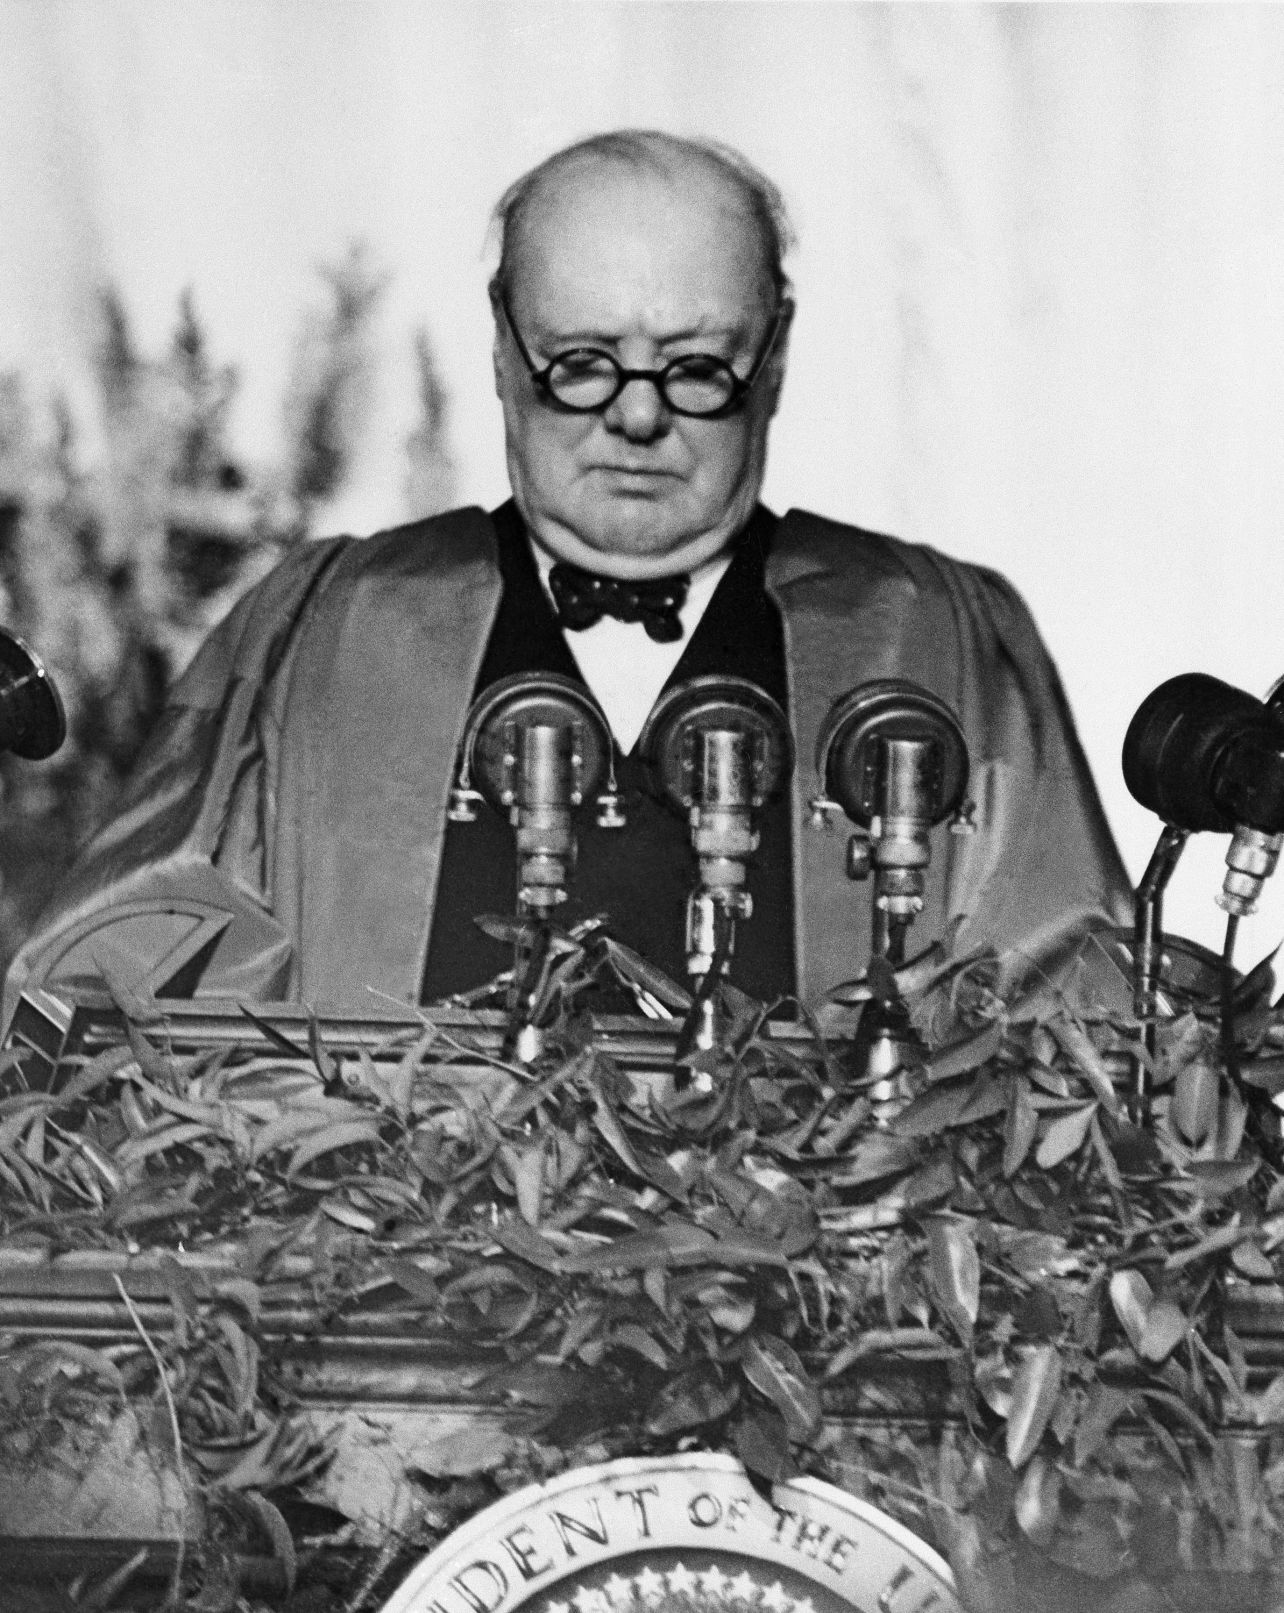 how did winston churchill coin the term iron curtain and when